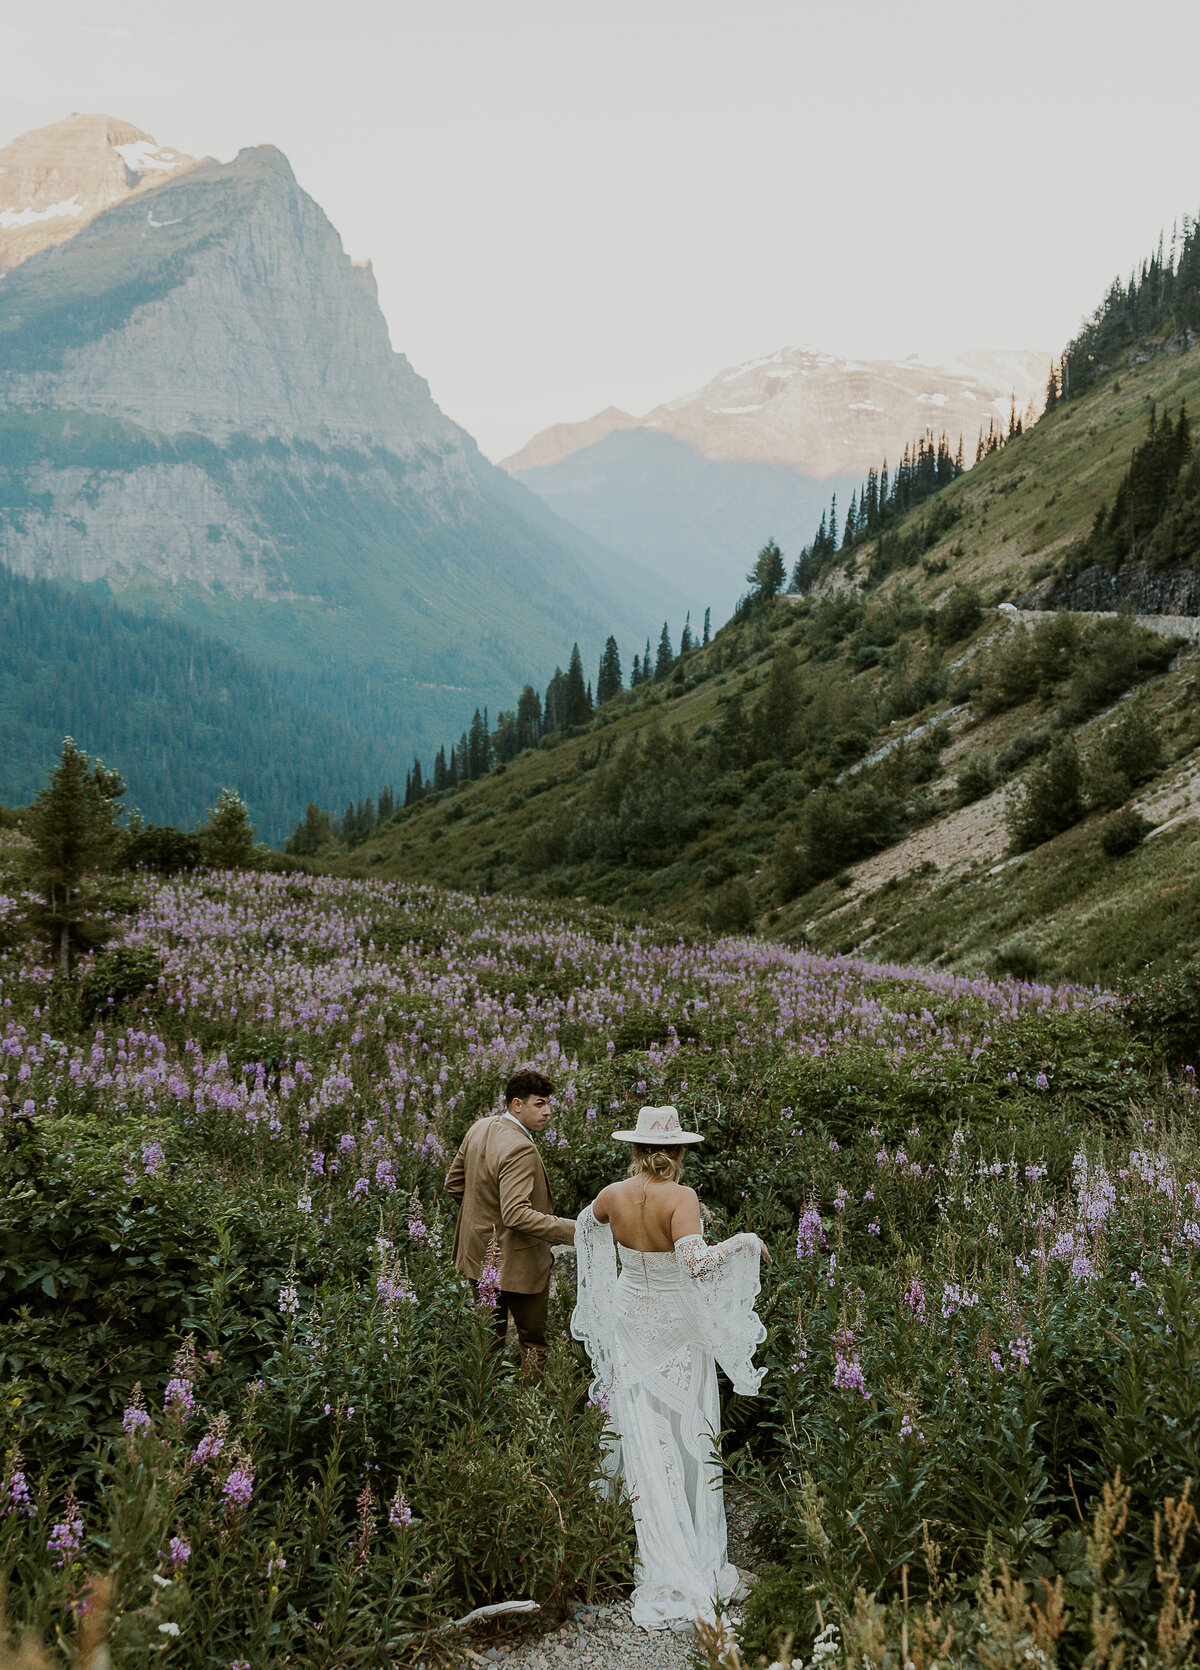 All-inclusive elopement packages start at $3000. All-Inclusive Elopement packages include unlimited professional elopement photography, elopement bouquet, travel and location planning.